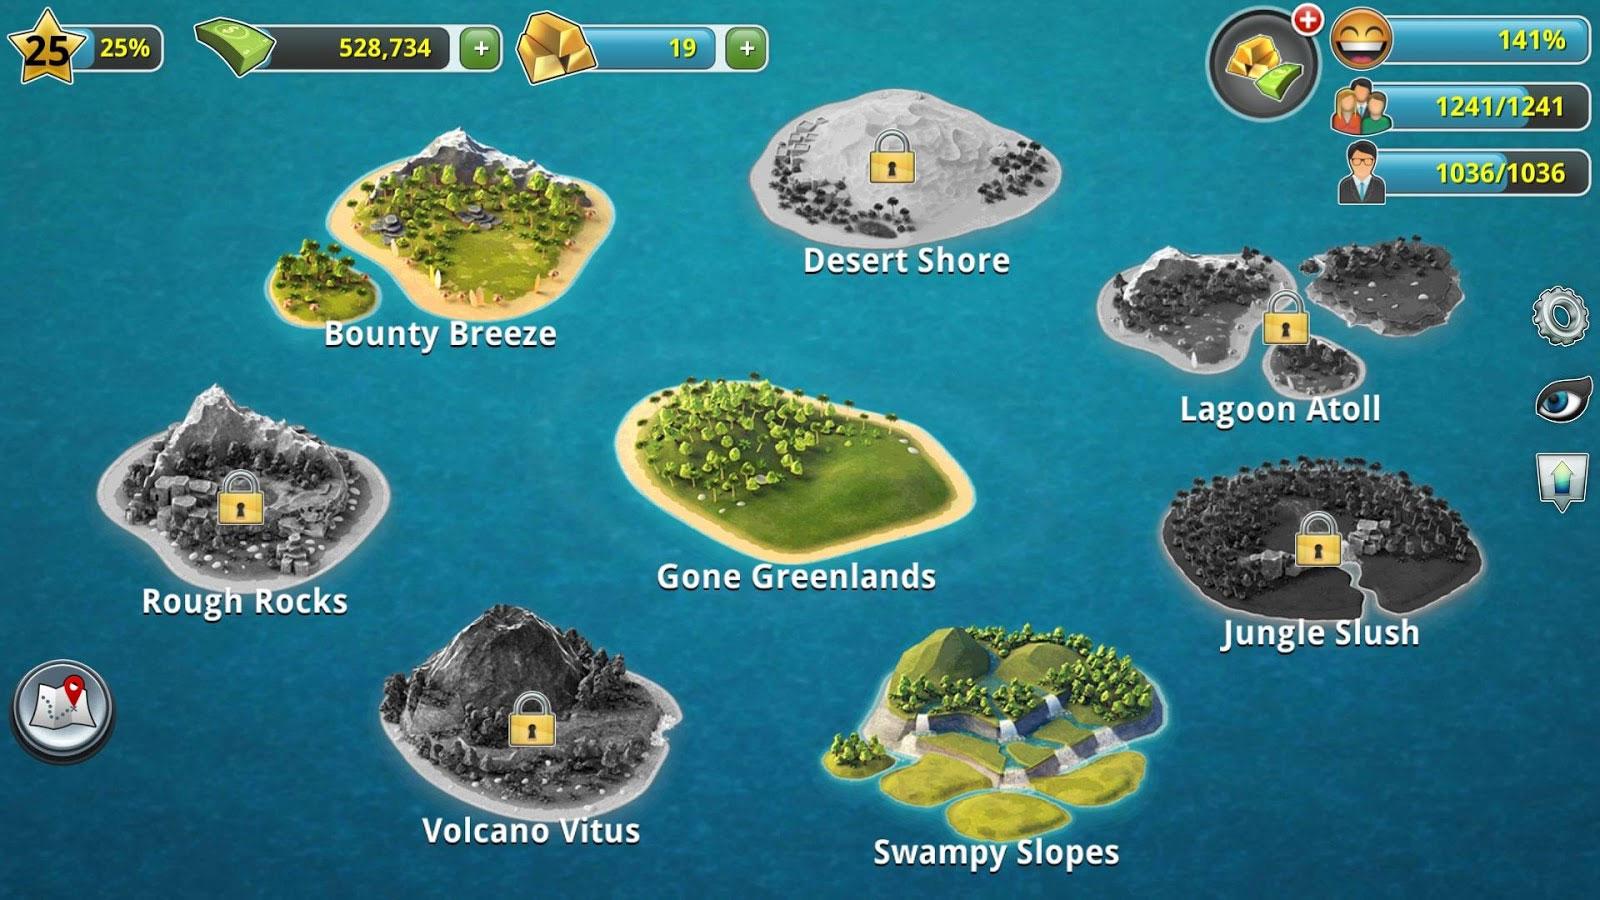 City Island: Collections download the new version